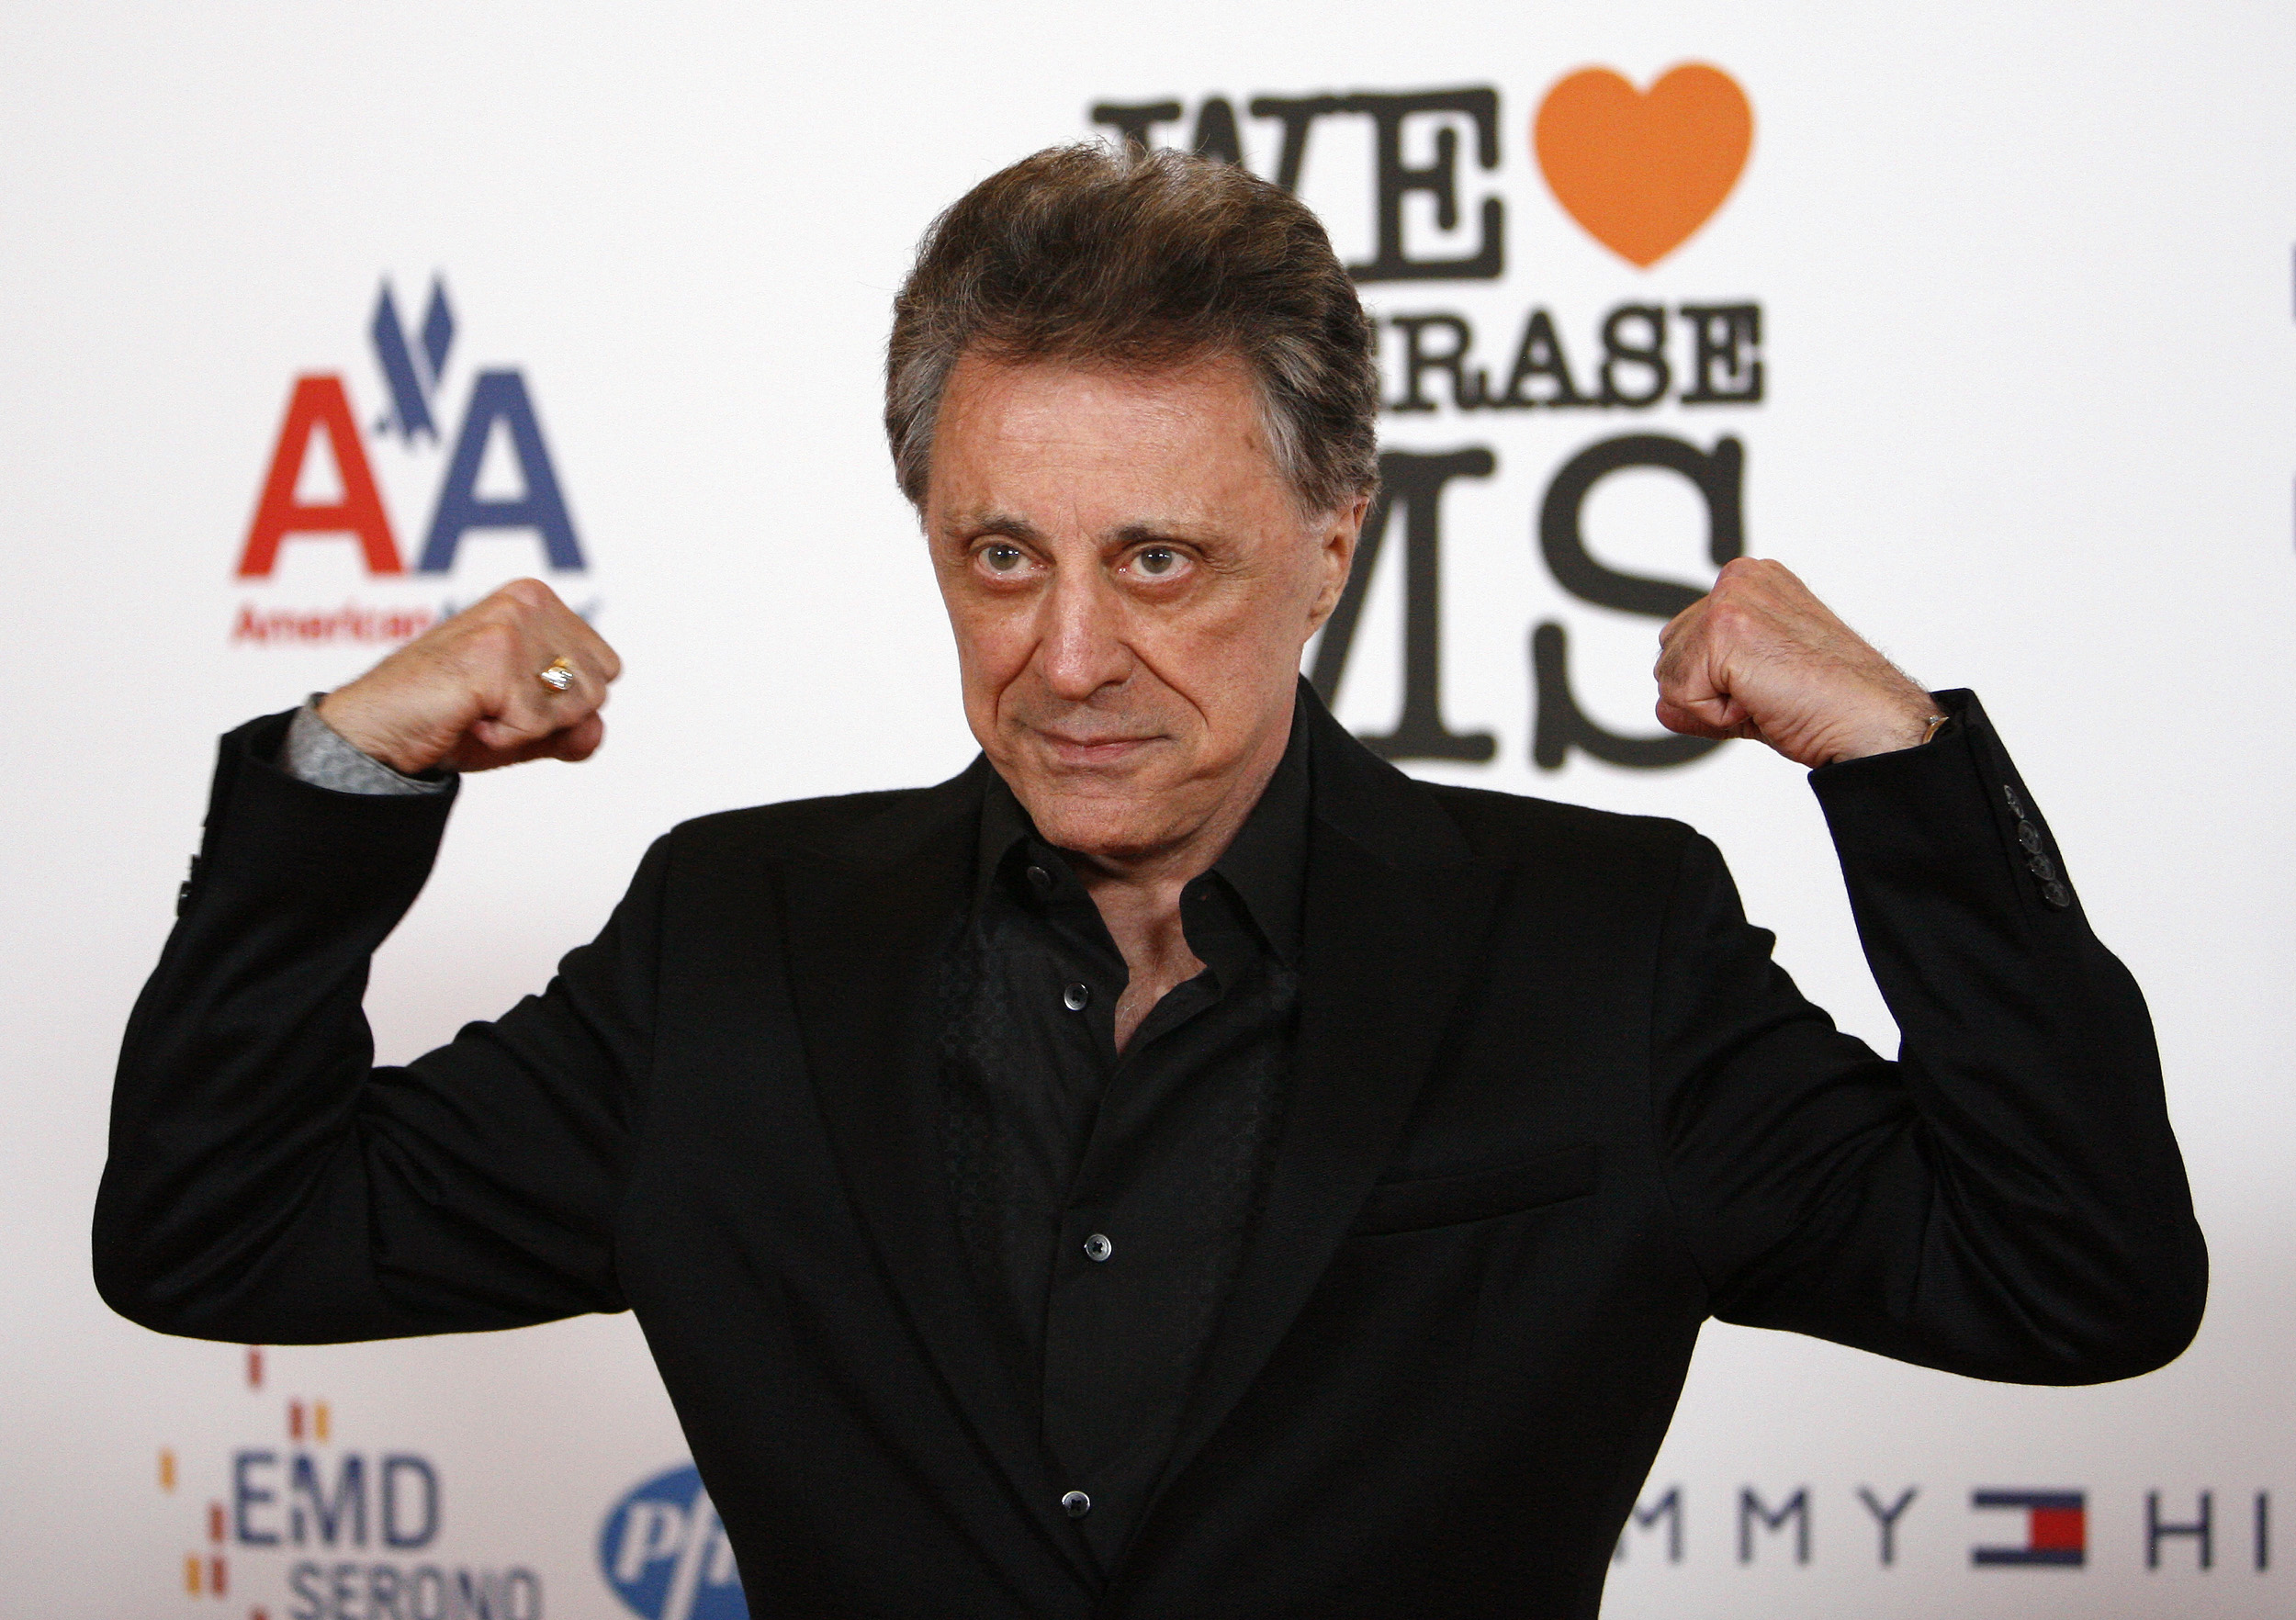 Singer Frankie Valli gestures at the 15th annual Race to Erase MS gala in Century City, California May 2, 2008. The evening benefits The Nancy Davis Foundation for Multiple Sclerosis. REUTERS/Mario Anzuoni (UNITED STATES)